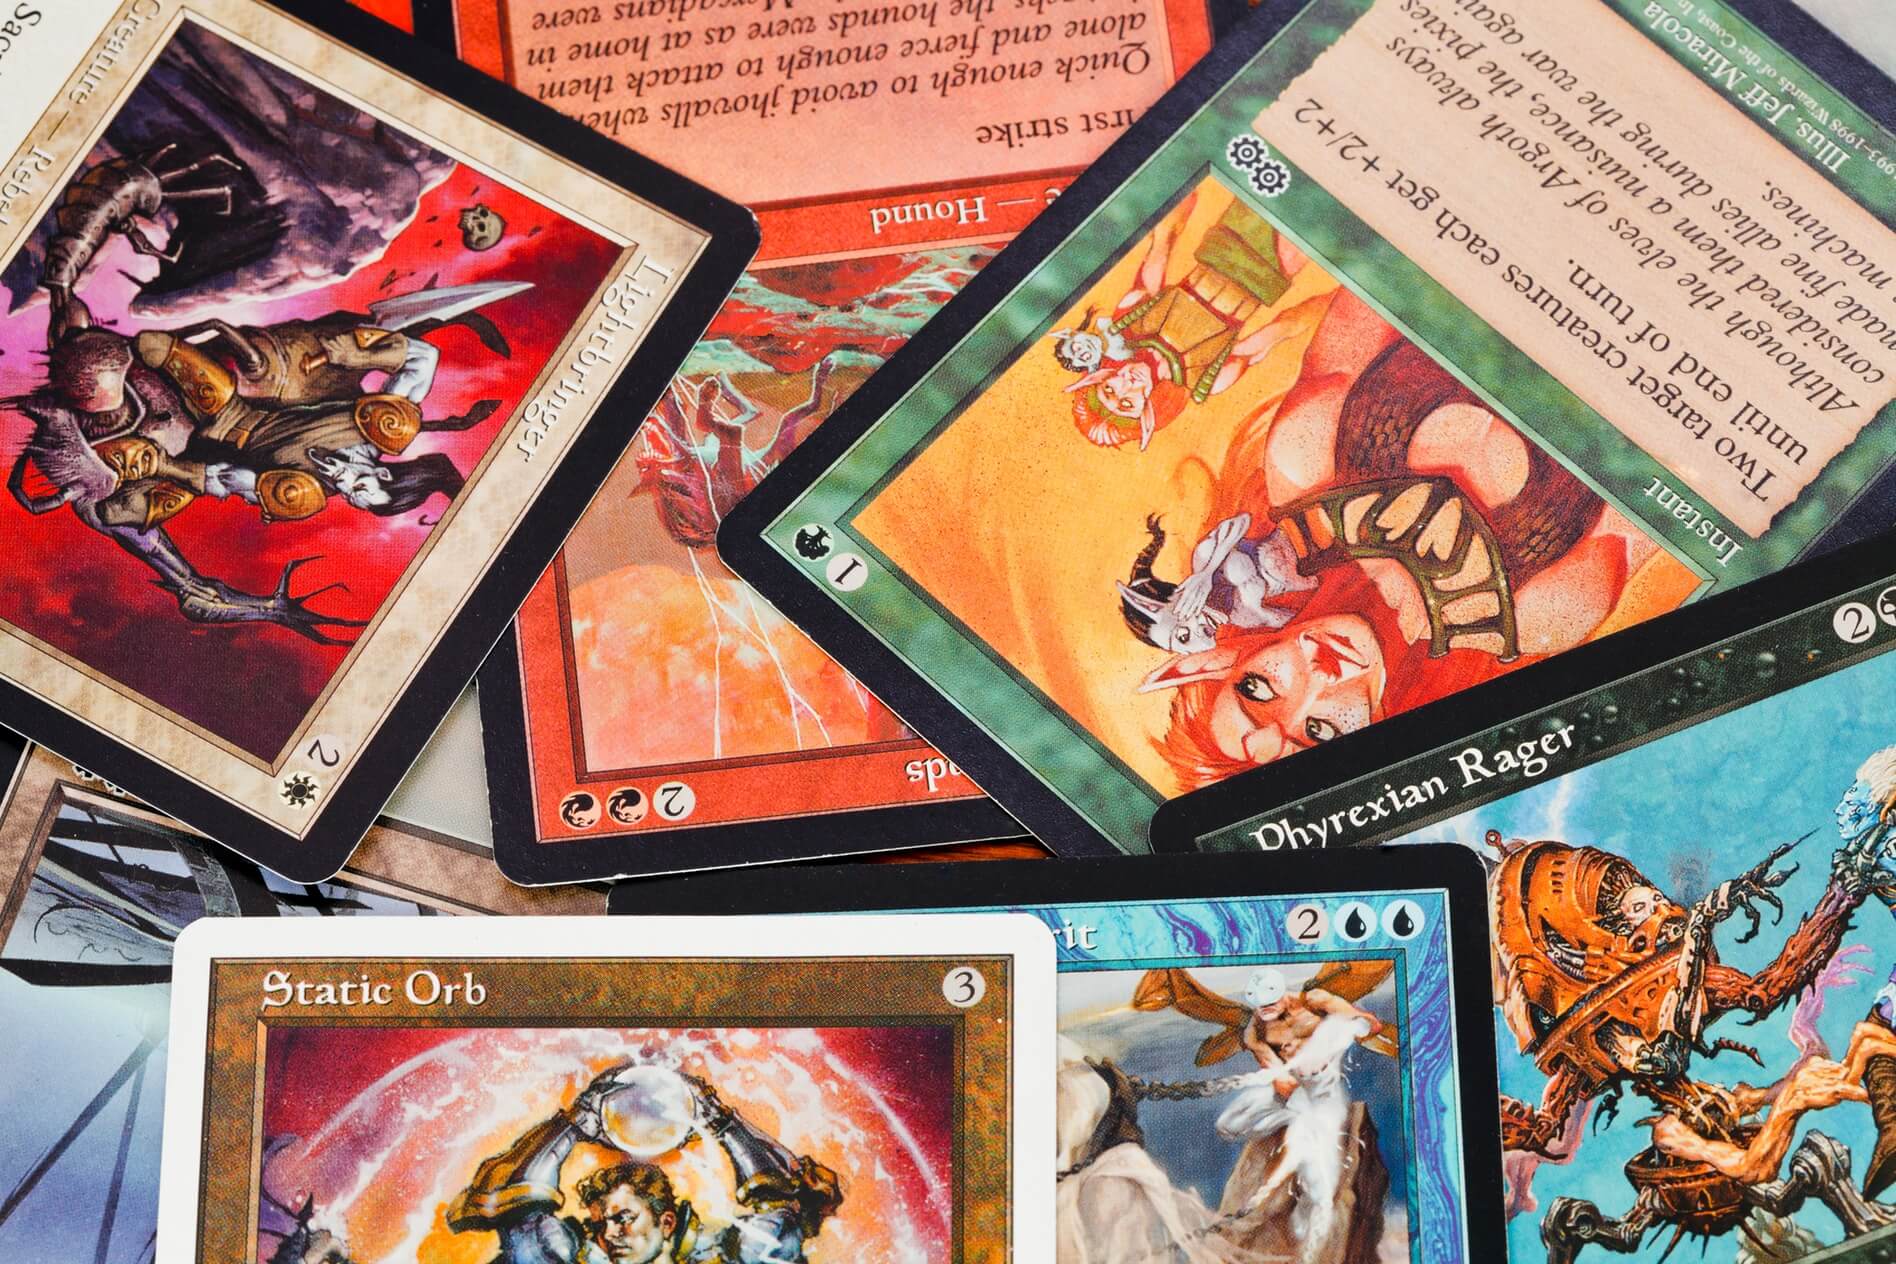 Forget Bitcoin: These guys invest in Magic cards